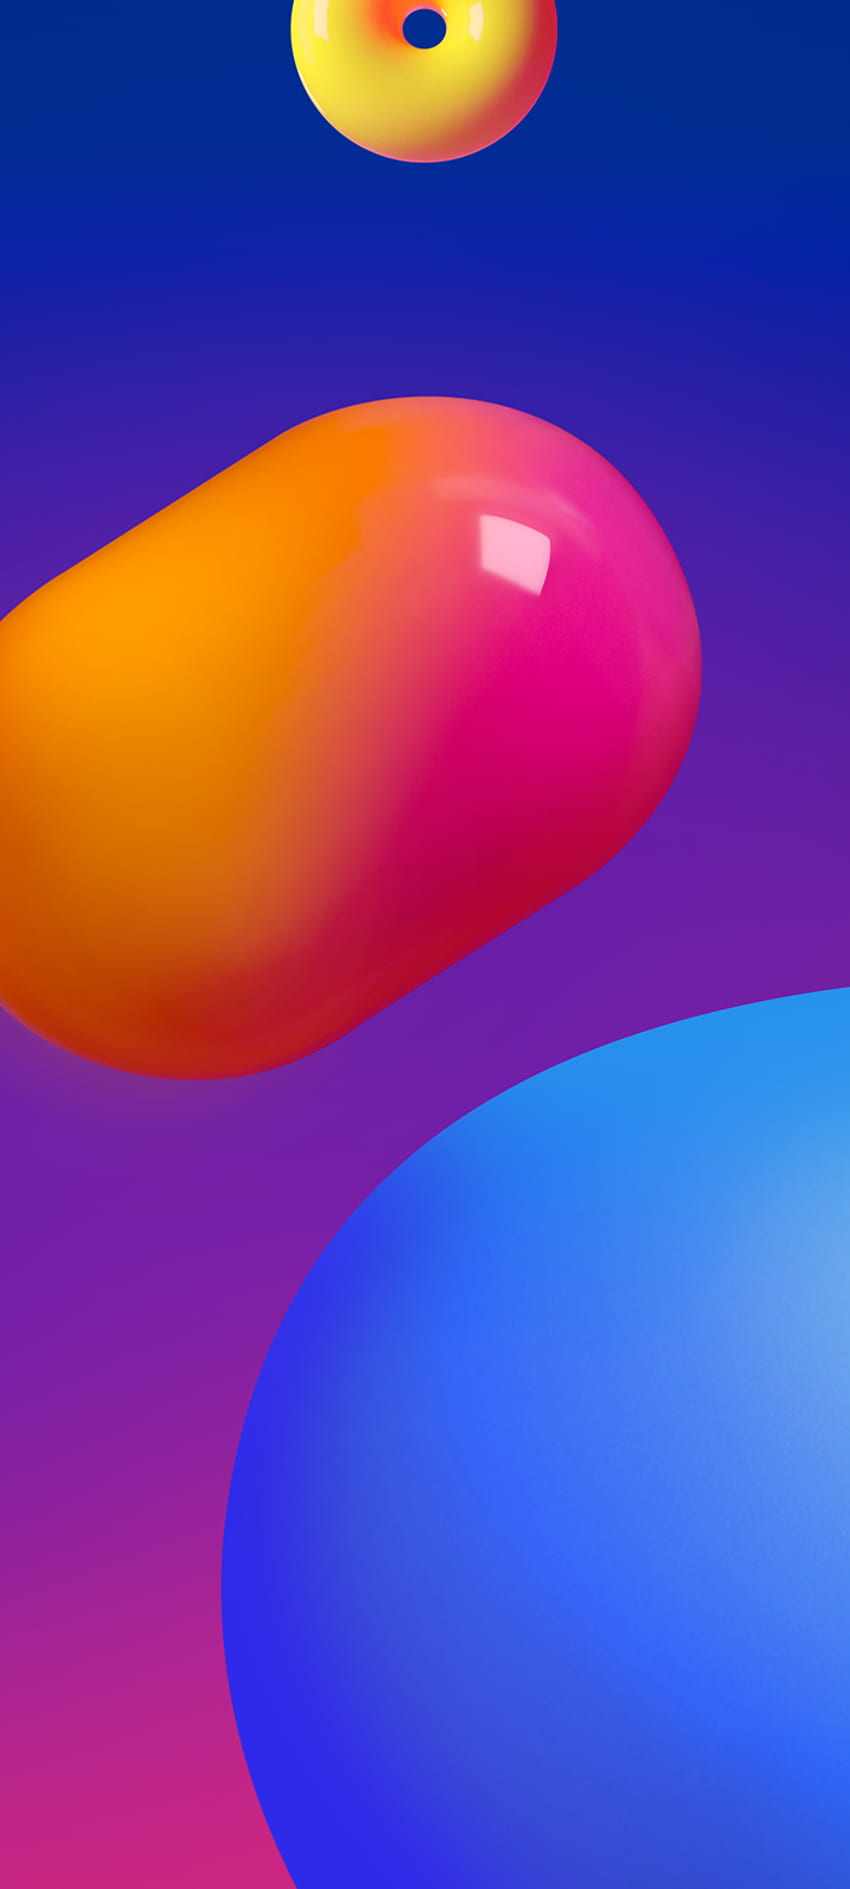 Samsung Galaxy M02 (YTECHB Exclusive) in 2021. Samsung , Samsung android, Colourful iphone, Samsung A22 HD phone wallpaper